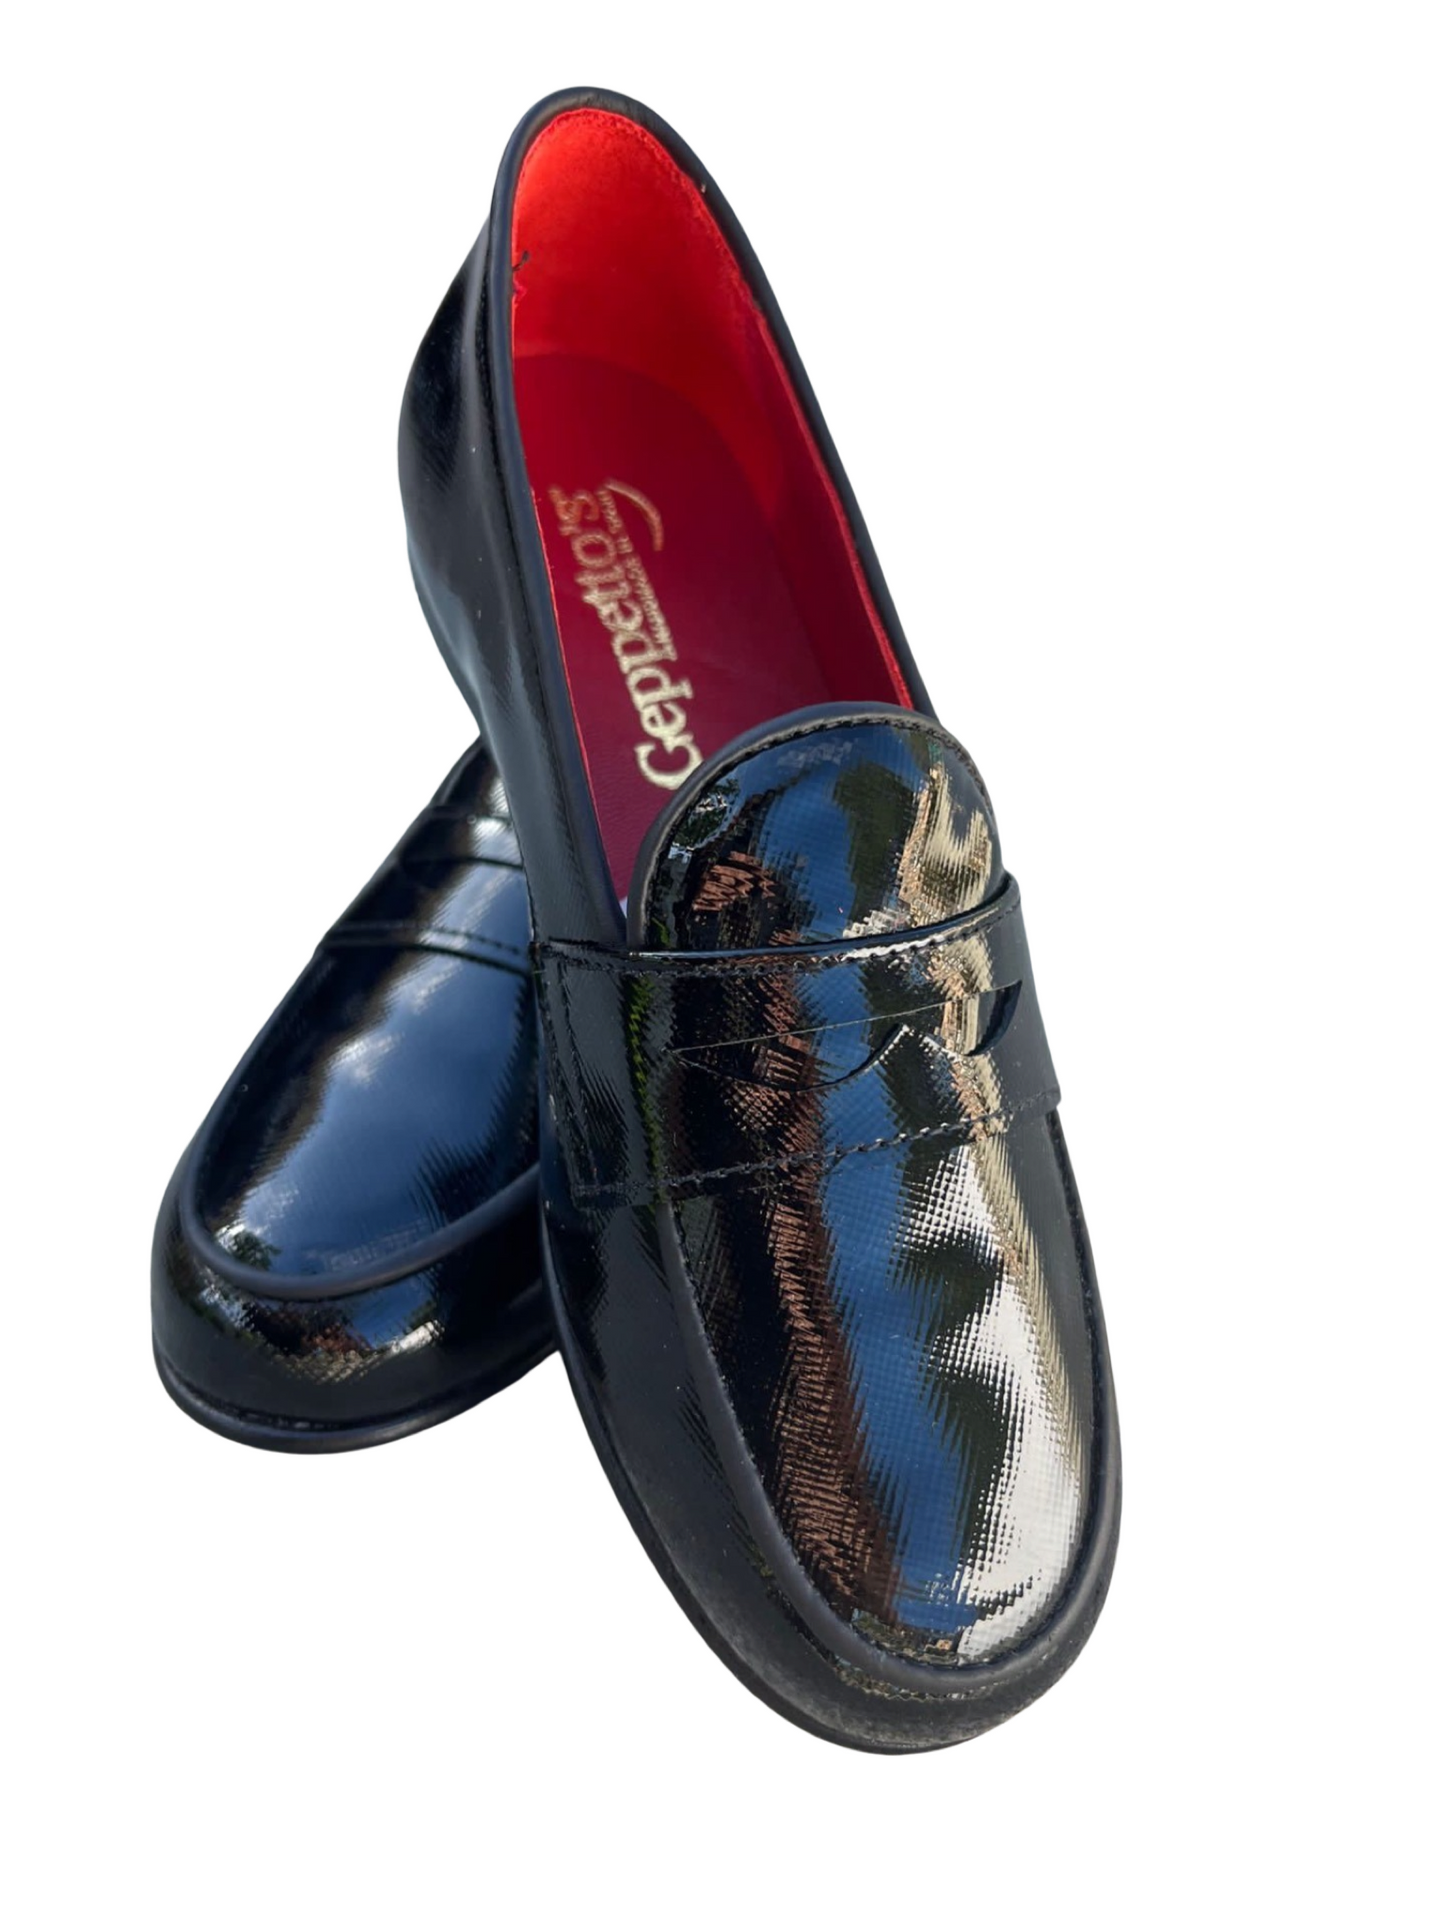 New Geppetto Boys Black Loafers